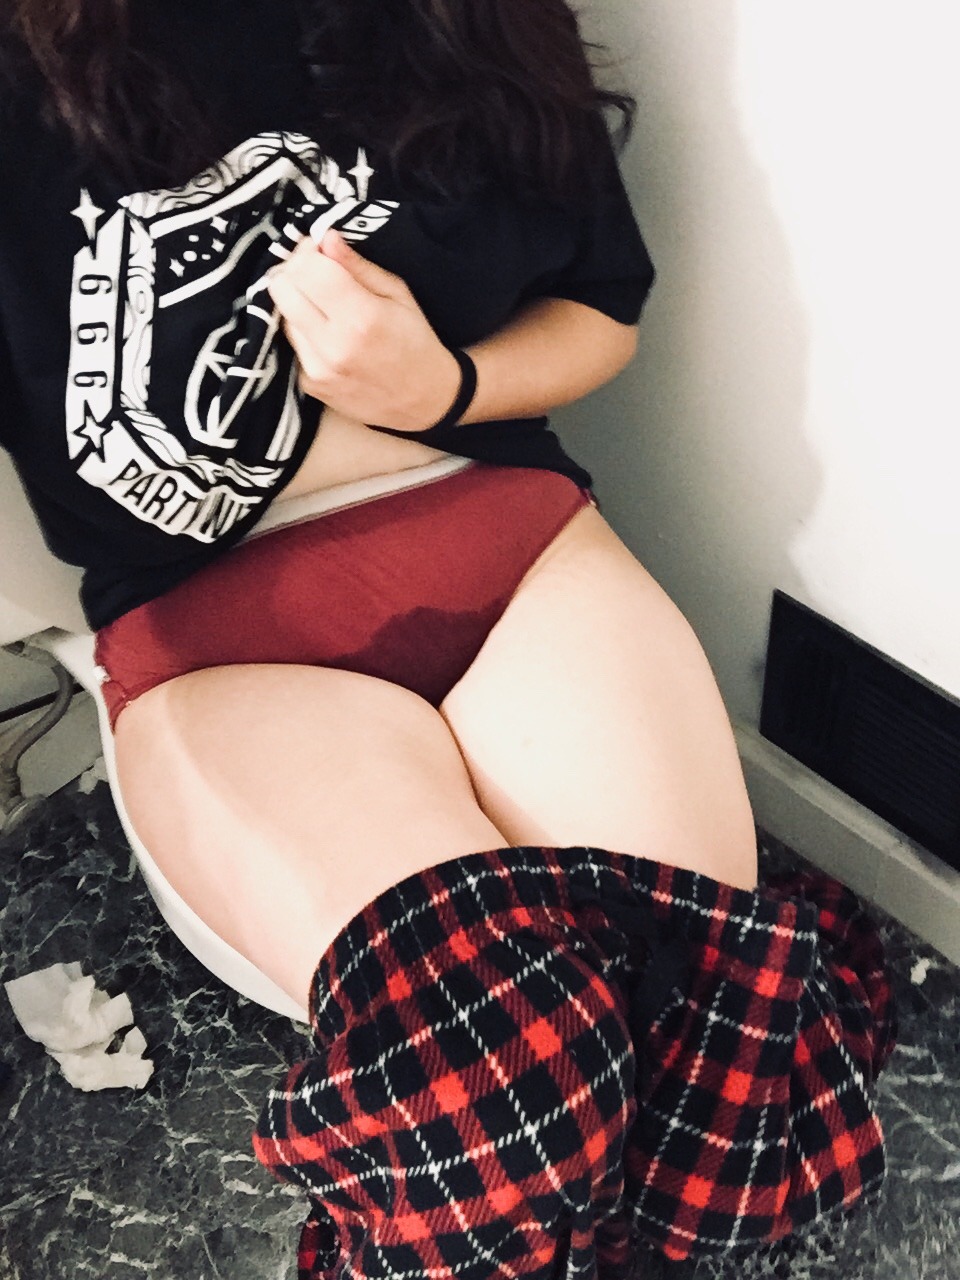 fluffy-omorashi: I made it all the way down the hall without peein my pants!!.. But as soon as I opened the door, I just couldn’t wait and started leaking while running across the bathroom to the toilet… ~(｡⋟﹏⋞｡”)  I opened the lid to